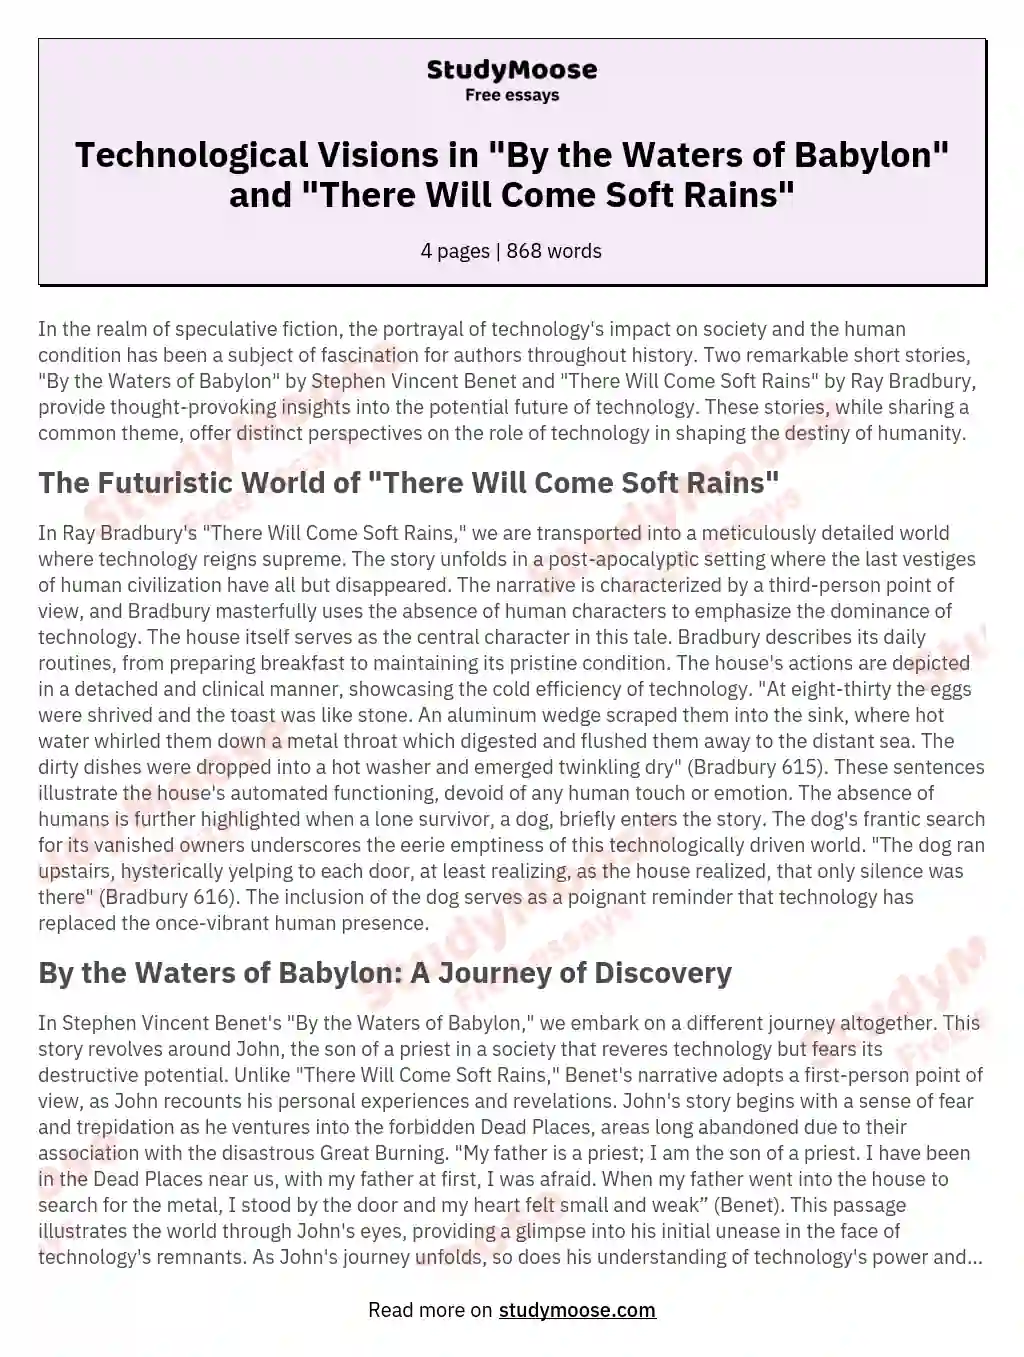 Technological Visions in "By the Waters of Babylon" and "There Will Come Soft Rains" essay